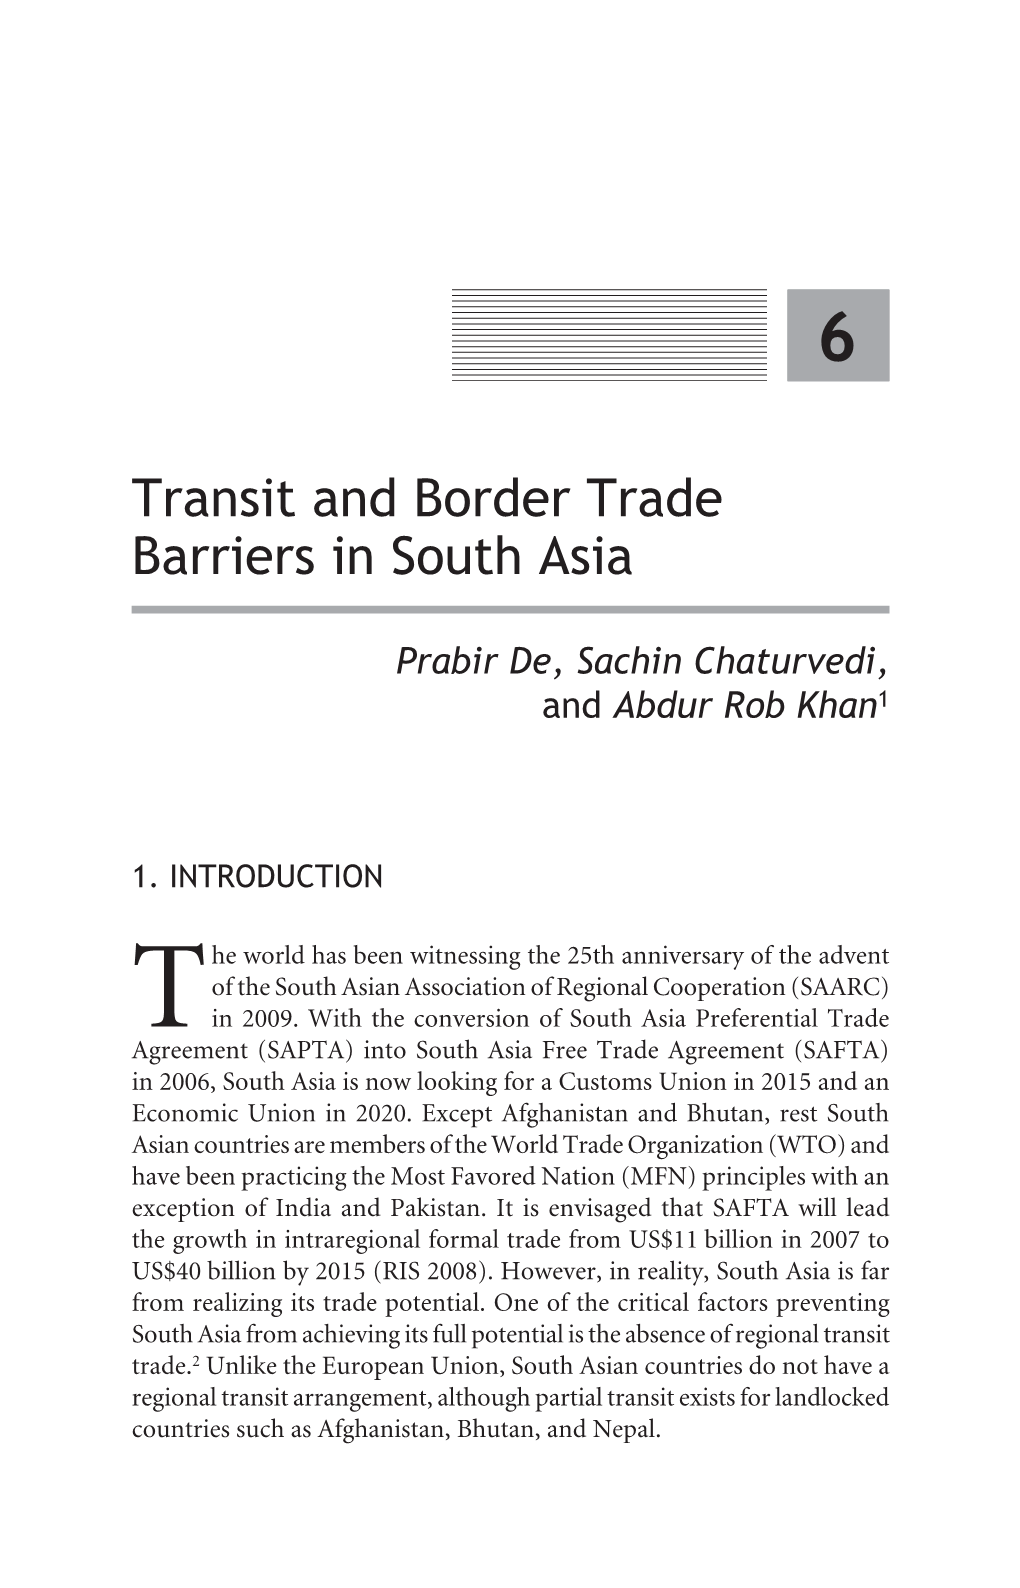 Transit and Border Trade Barriers in South Asia